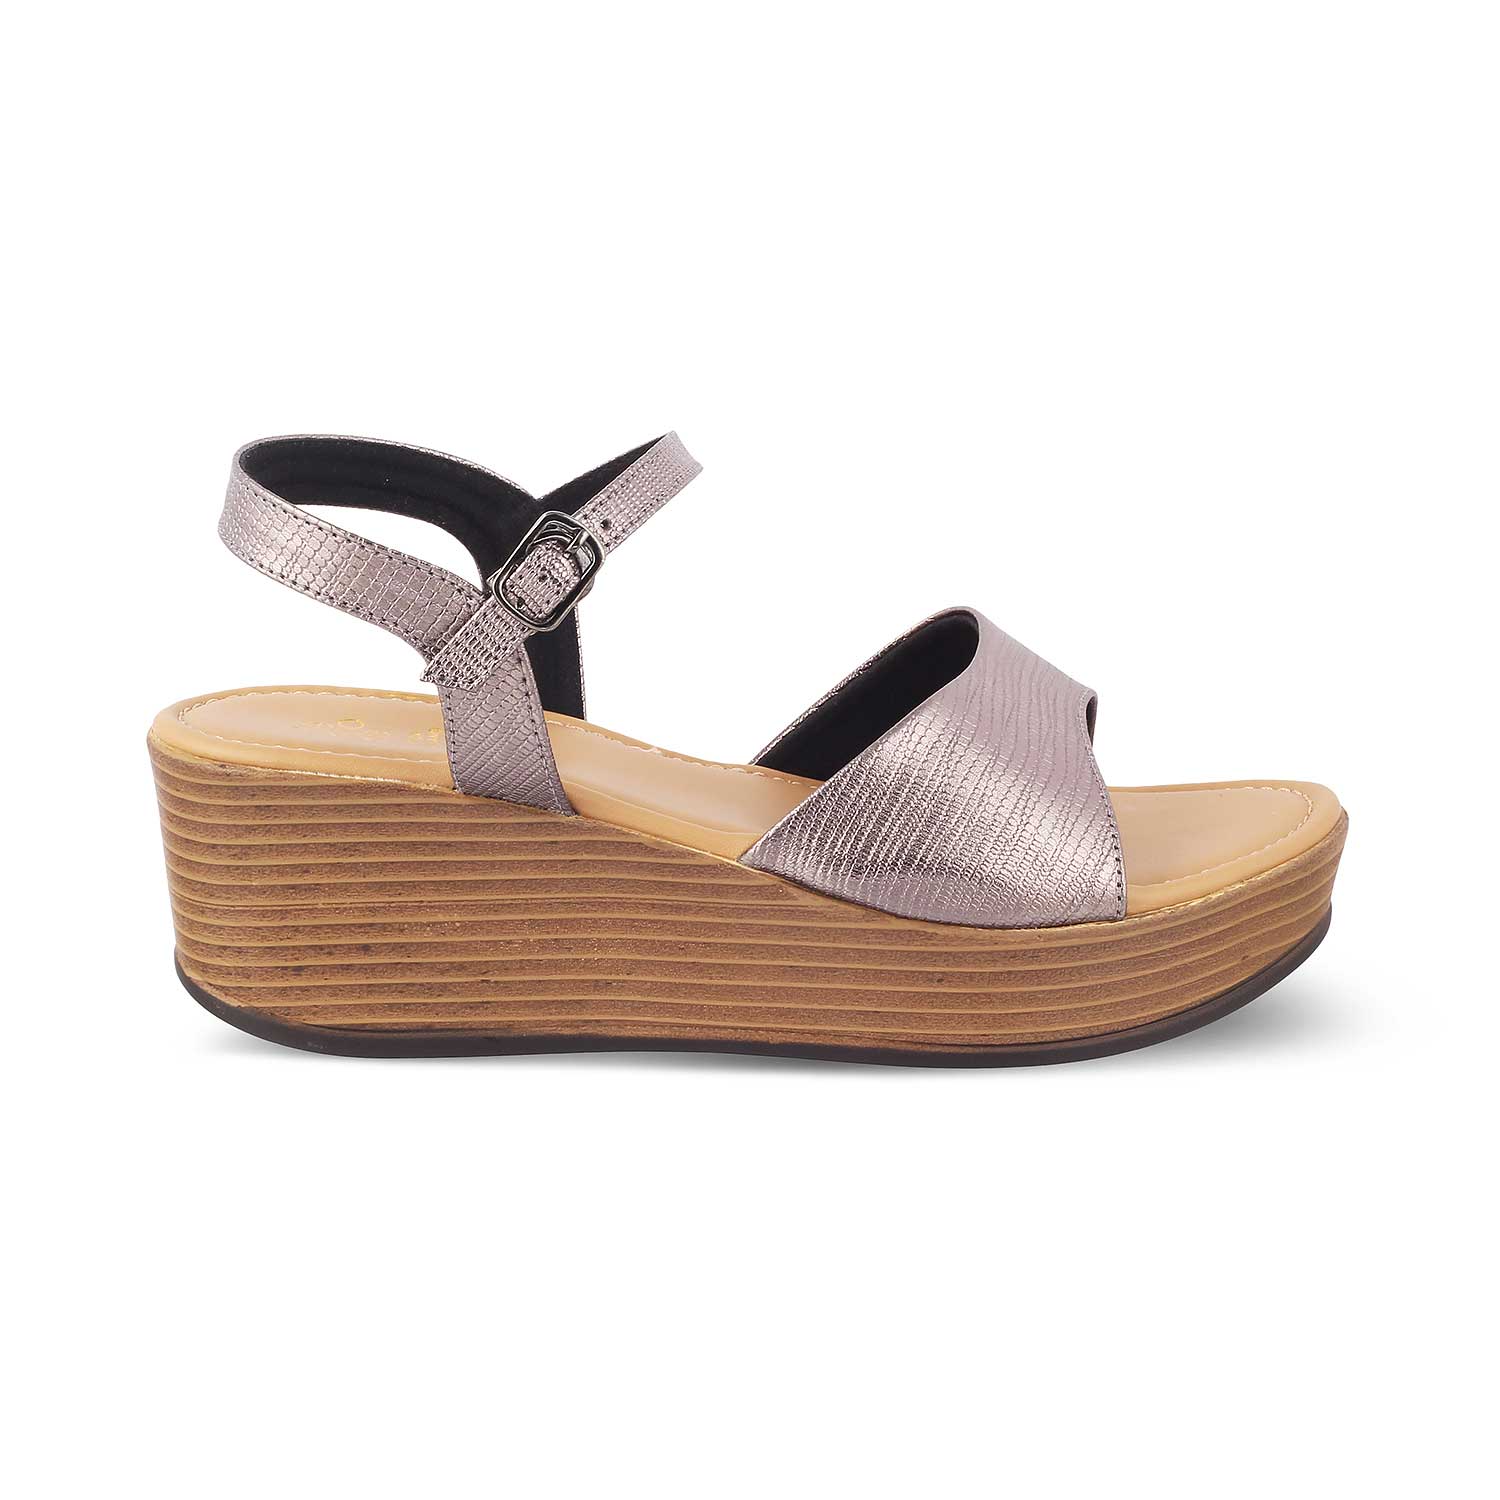 The Cannes Pewter Women's Dress Wedge Sandals Tresmode - Tresmode